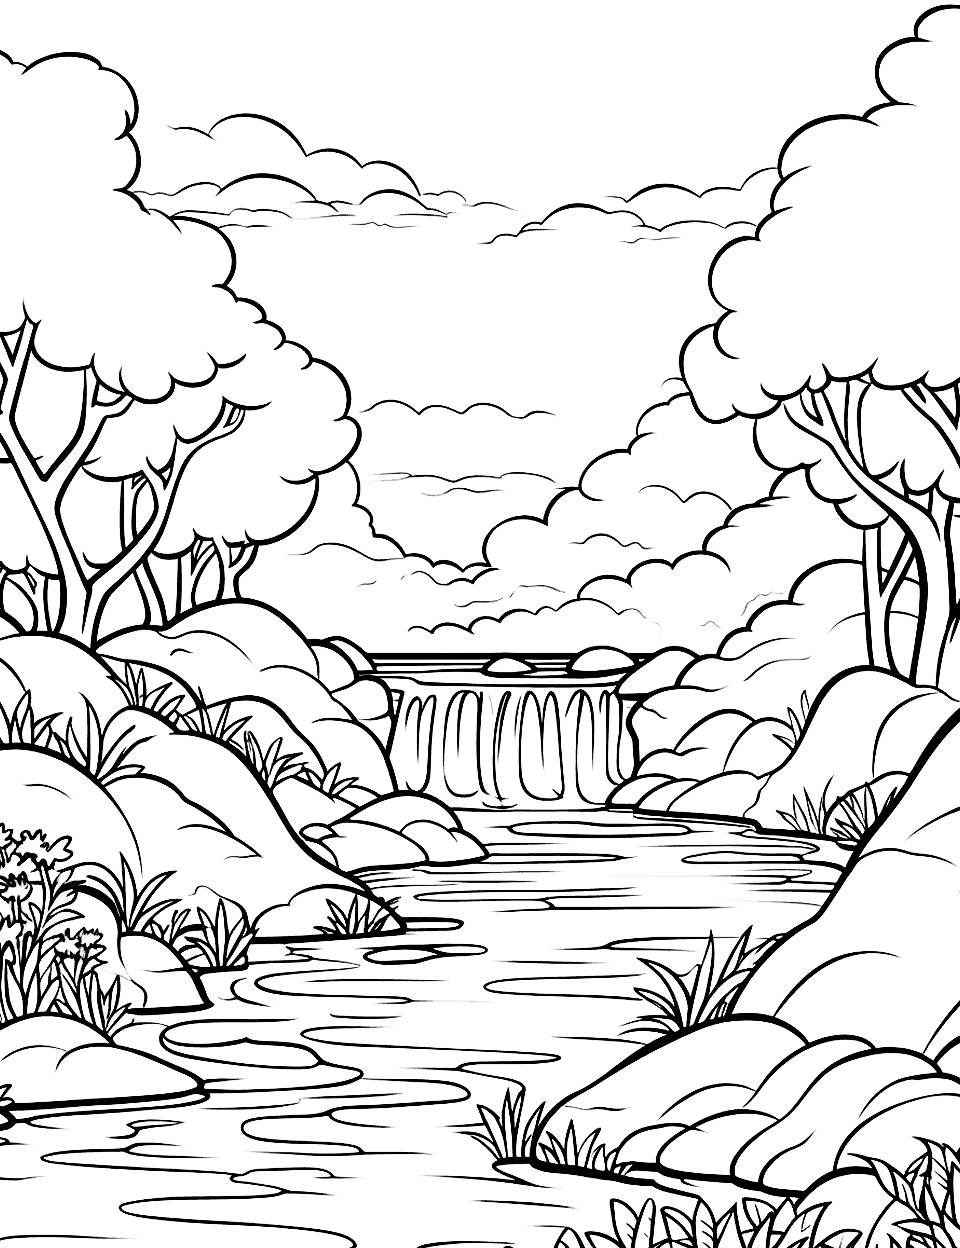 Tranquil Waterfall Oasis Nature Coloring Page - A cascading waterfall into a clear, serene pool surrounded by rocks.